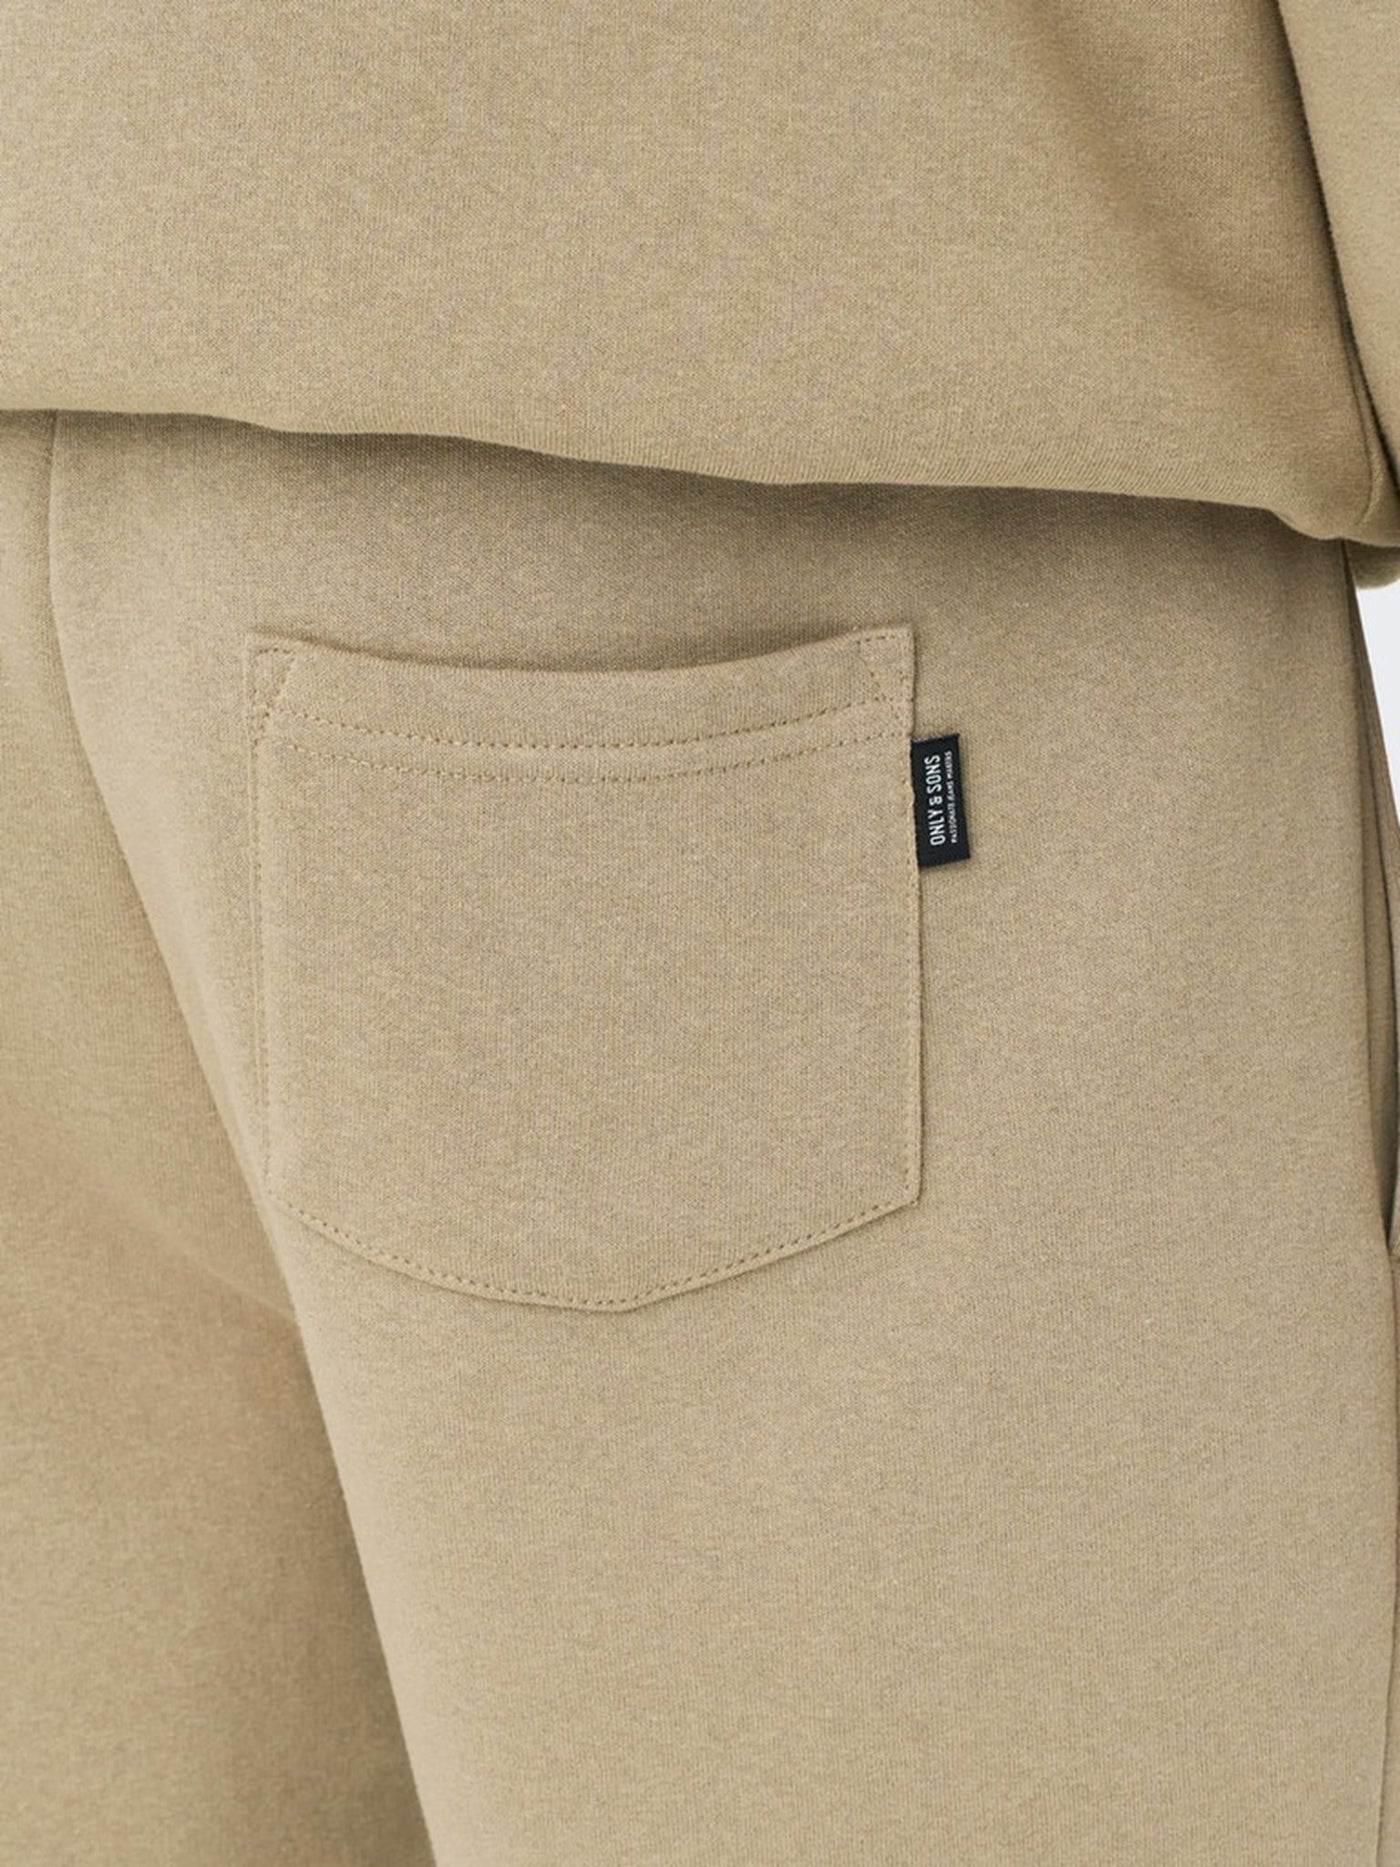 Classic Sweatpants - Chinchilla - Only & Sons - Sand/Beige 3